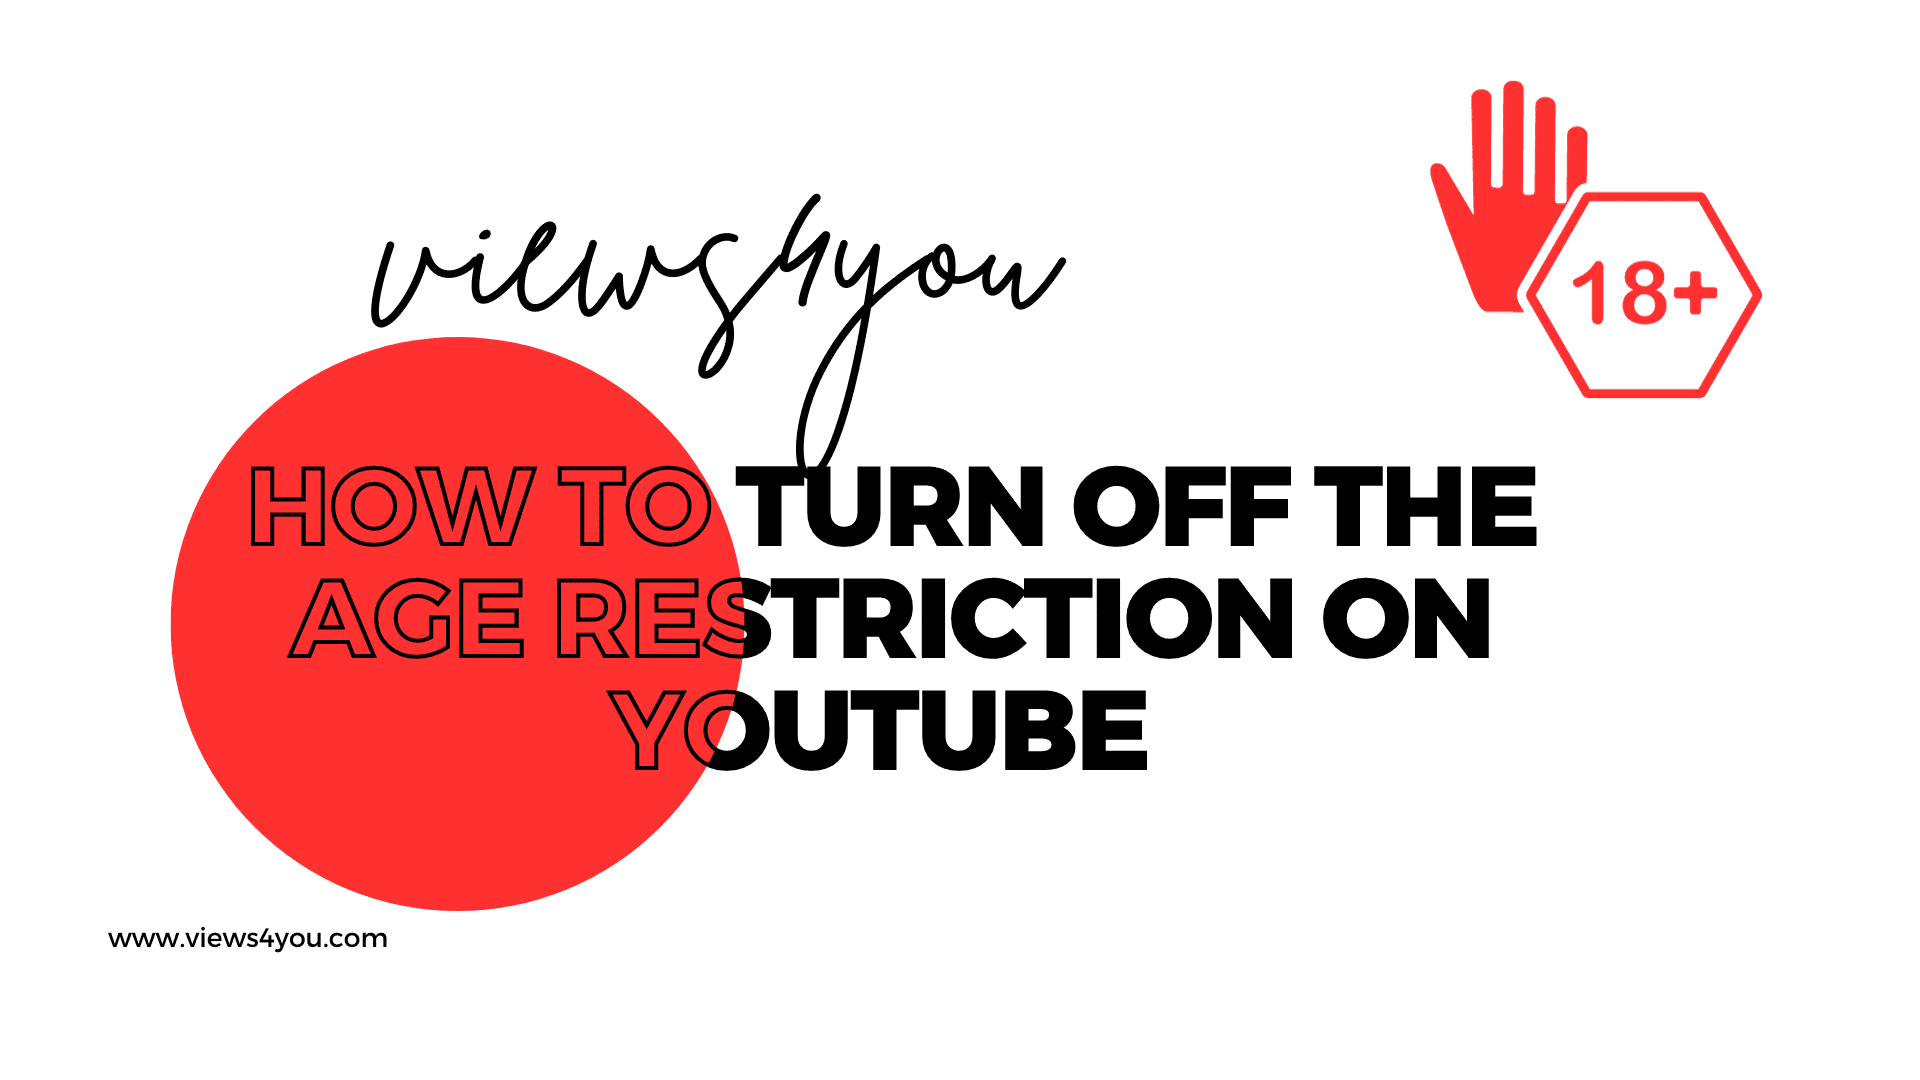 Step by step guide to turn off age restriction on YouTube.